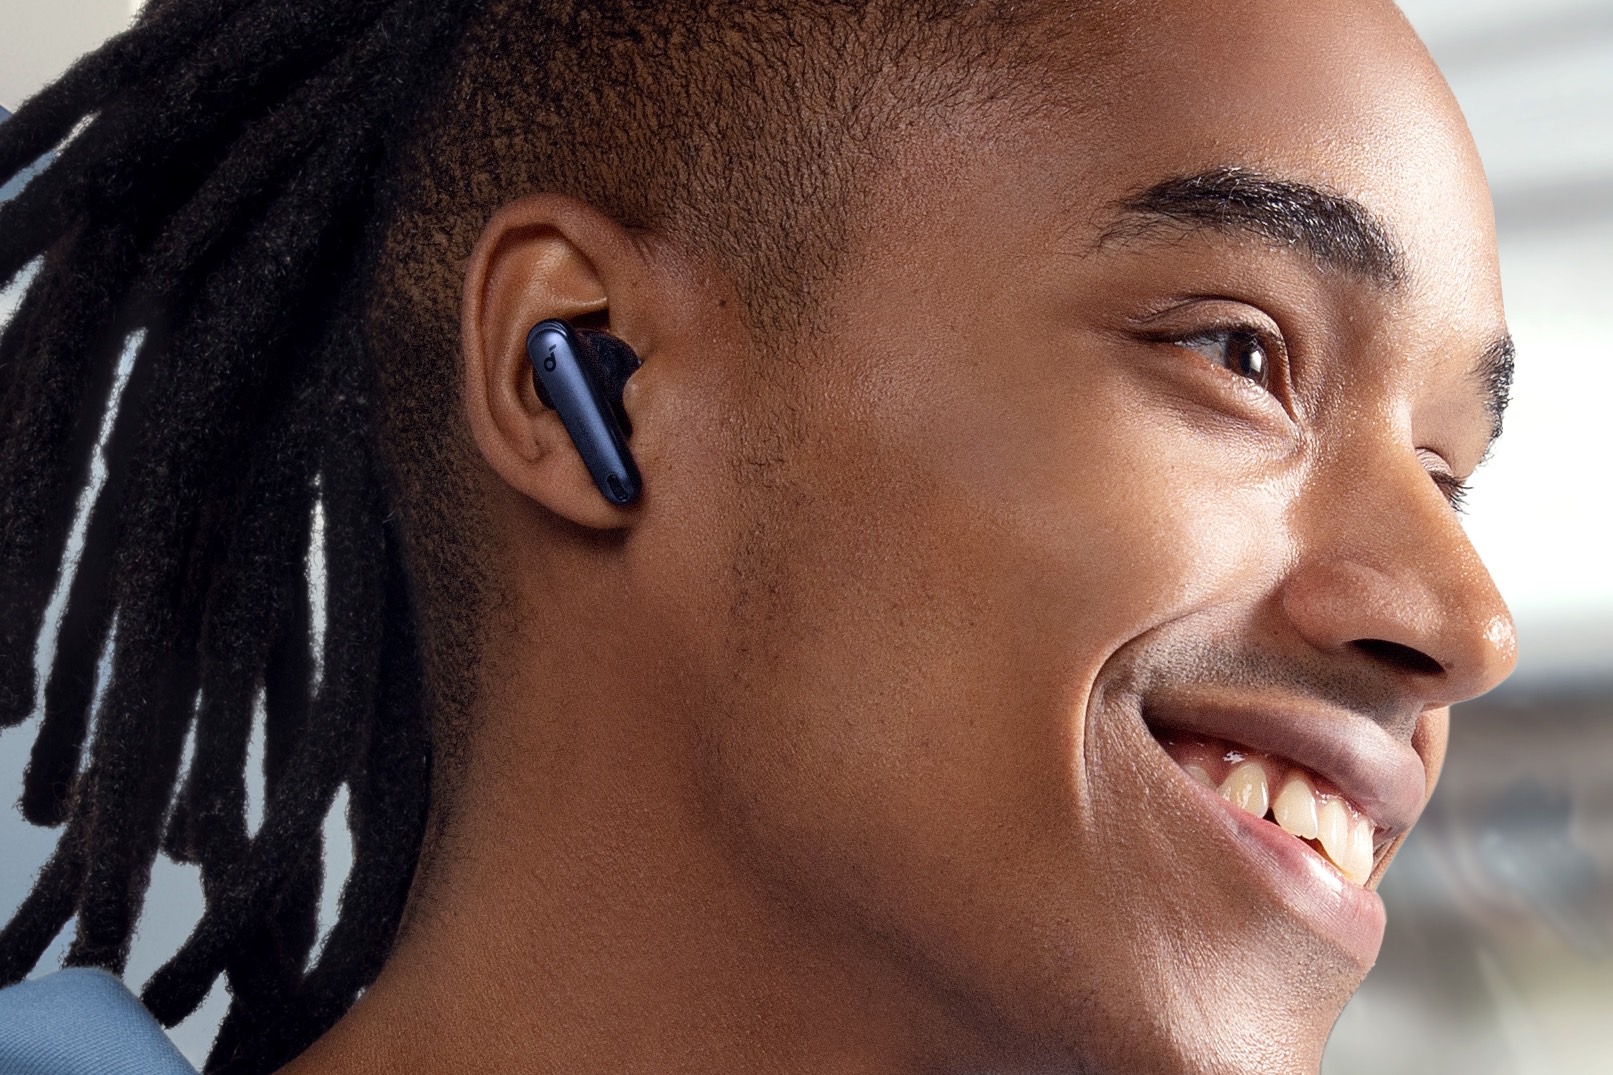 Anker Debuts Liberty 4, $100 Earbuds With 50-Hr Battery